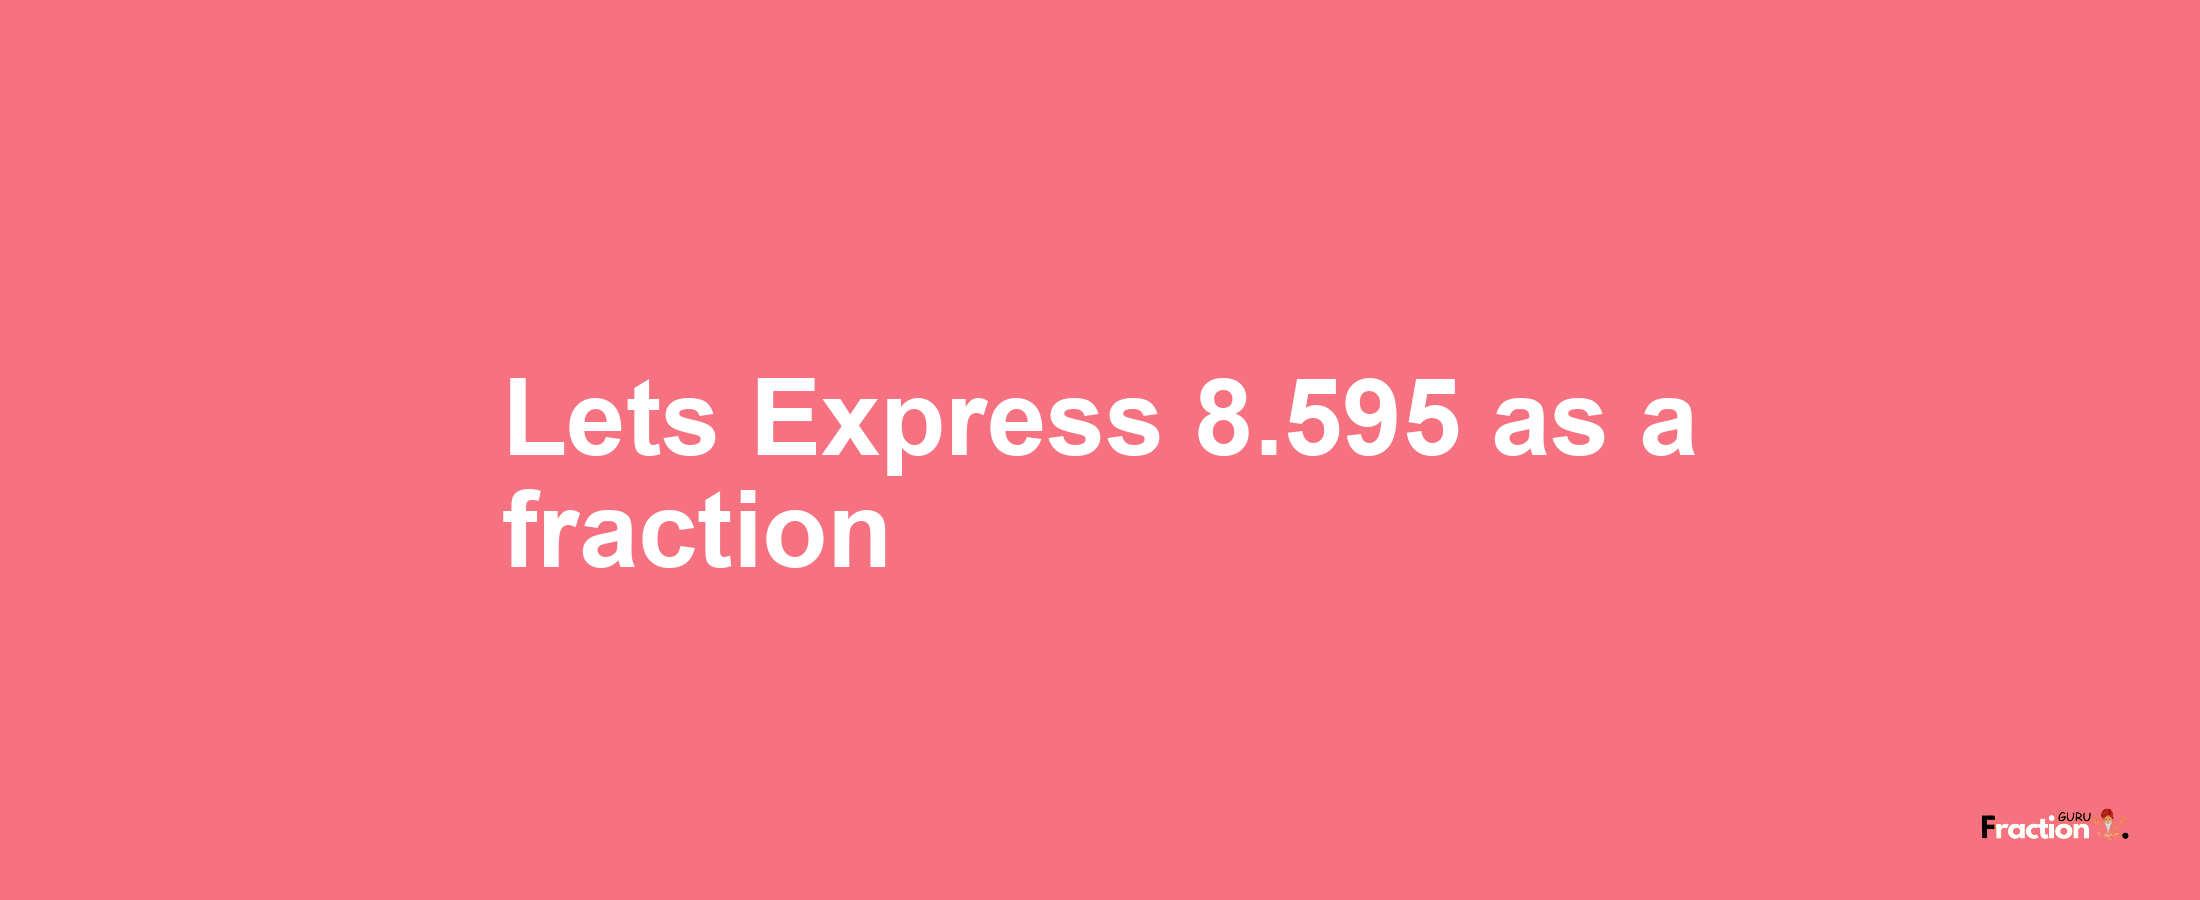 Lets Express 8.595 as afraction